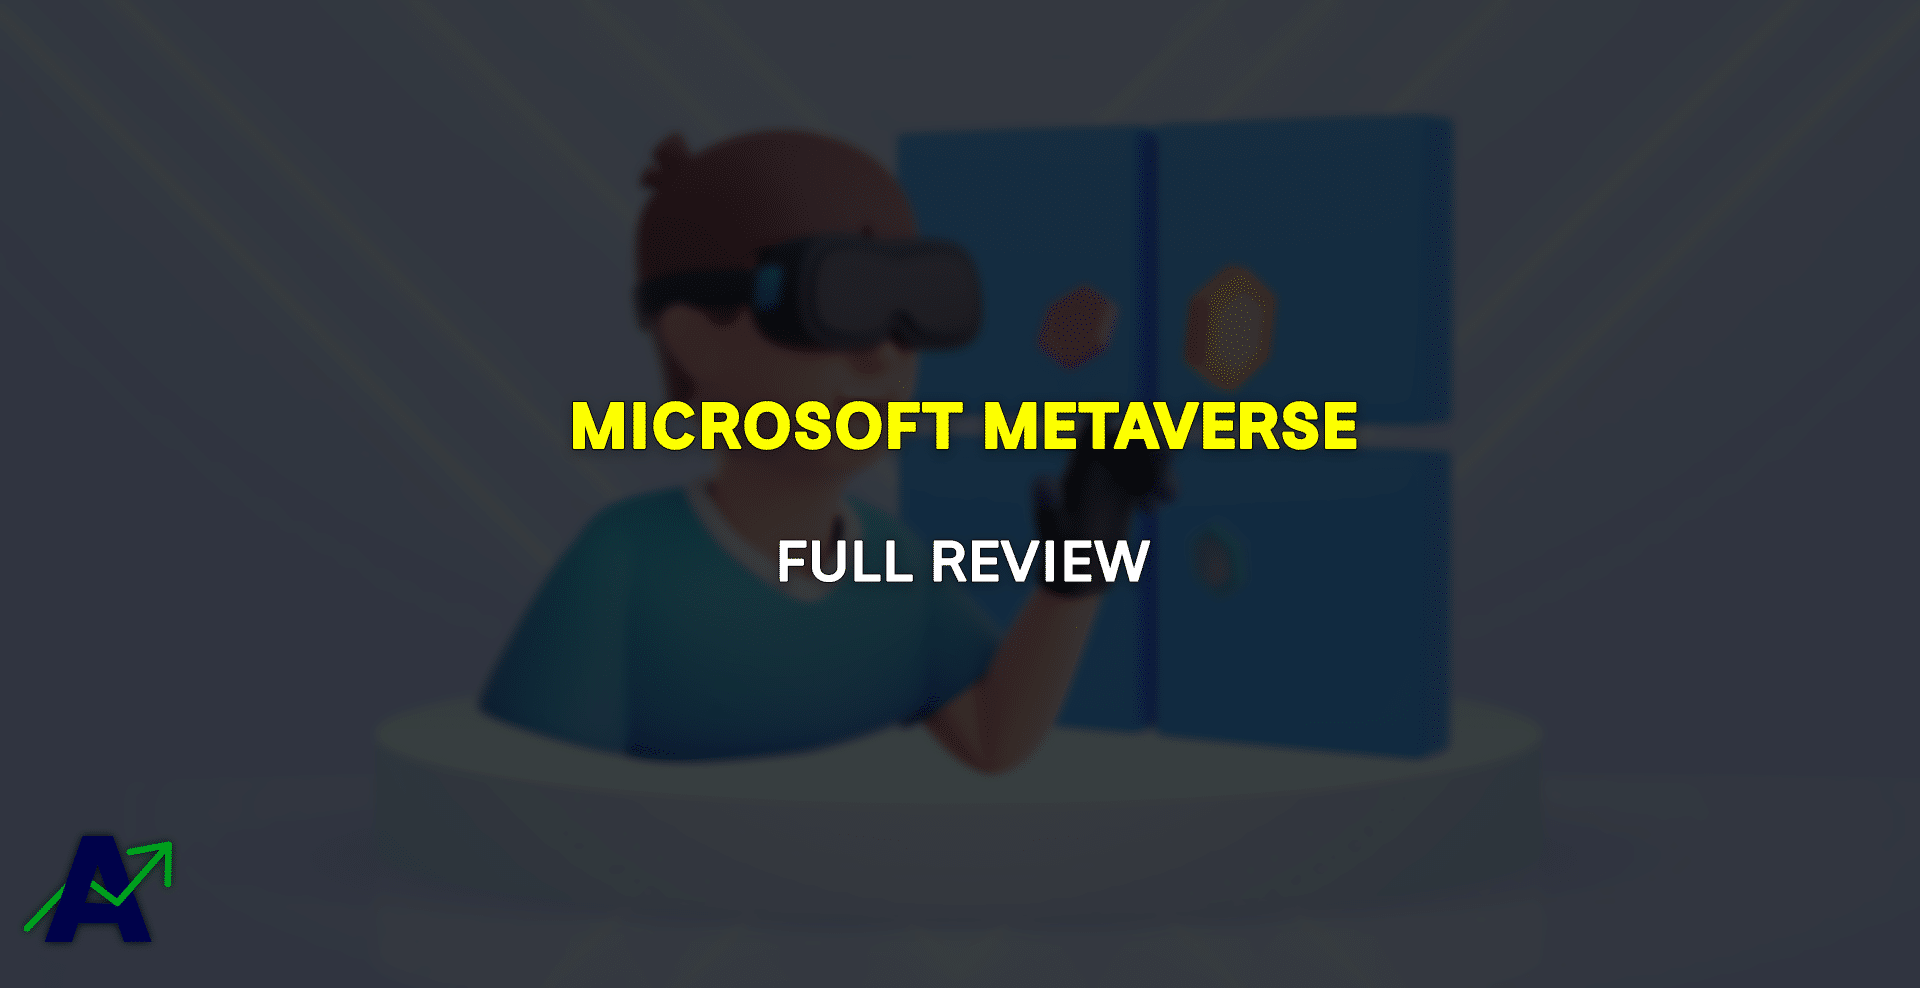 Microsoft and the Metaverse - what are Microsoft’s points of view